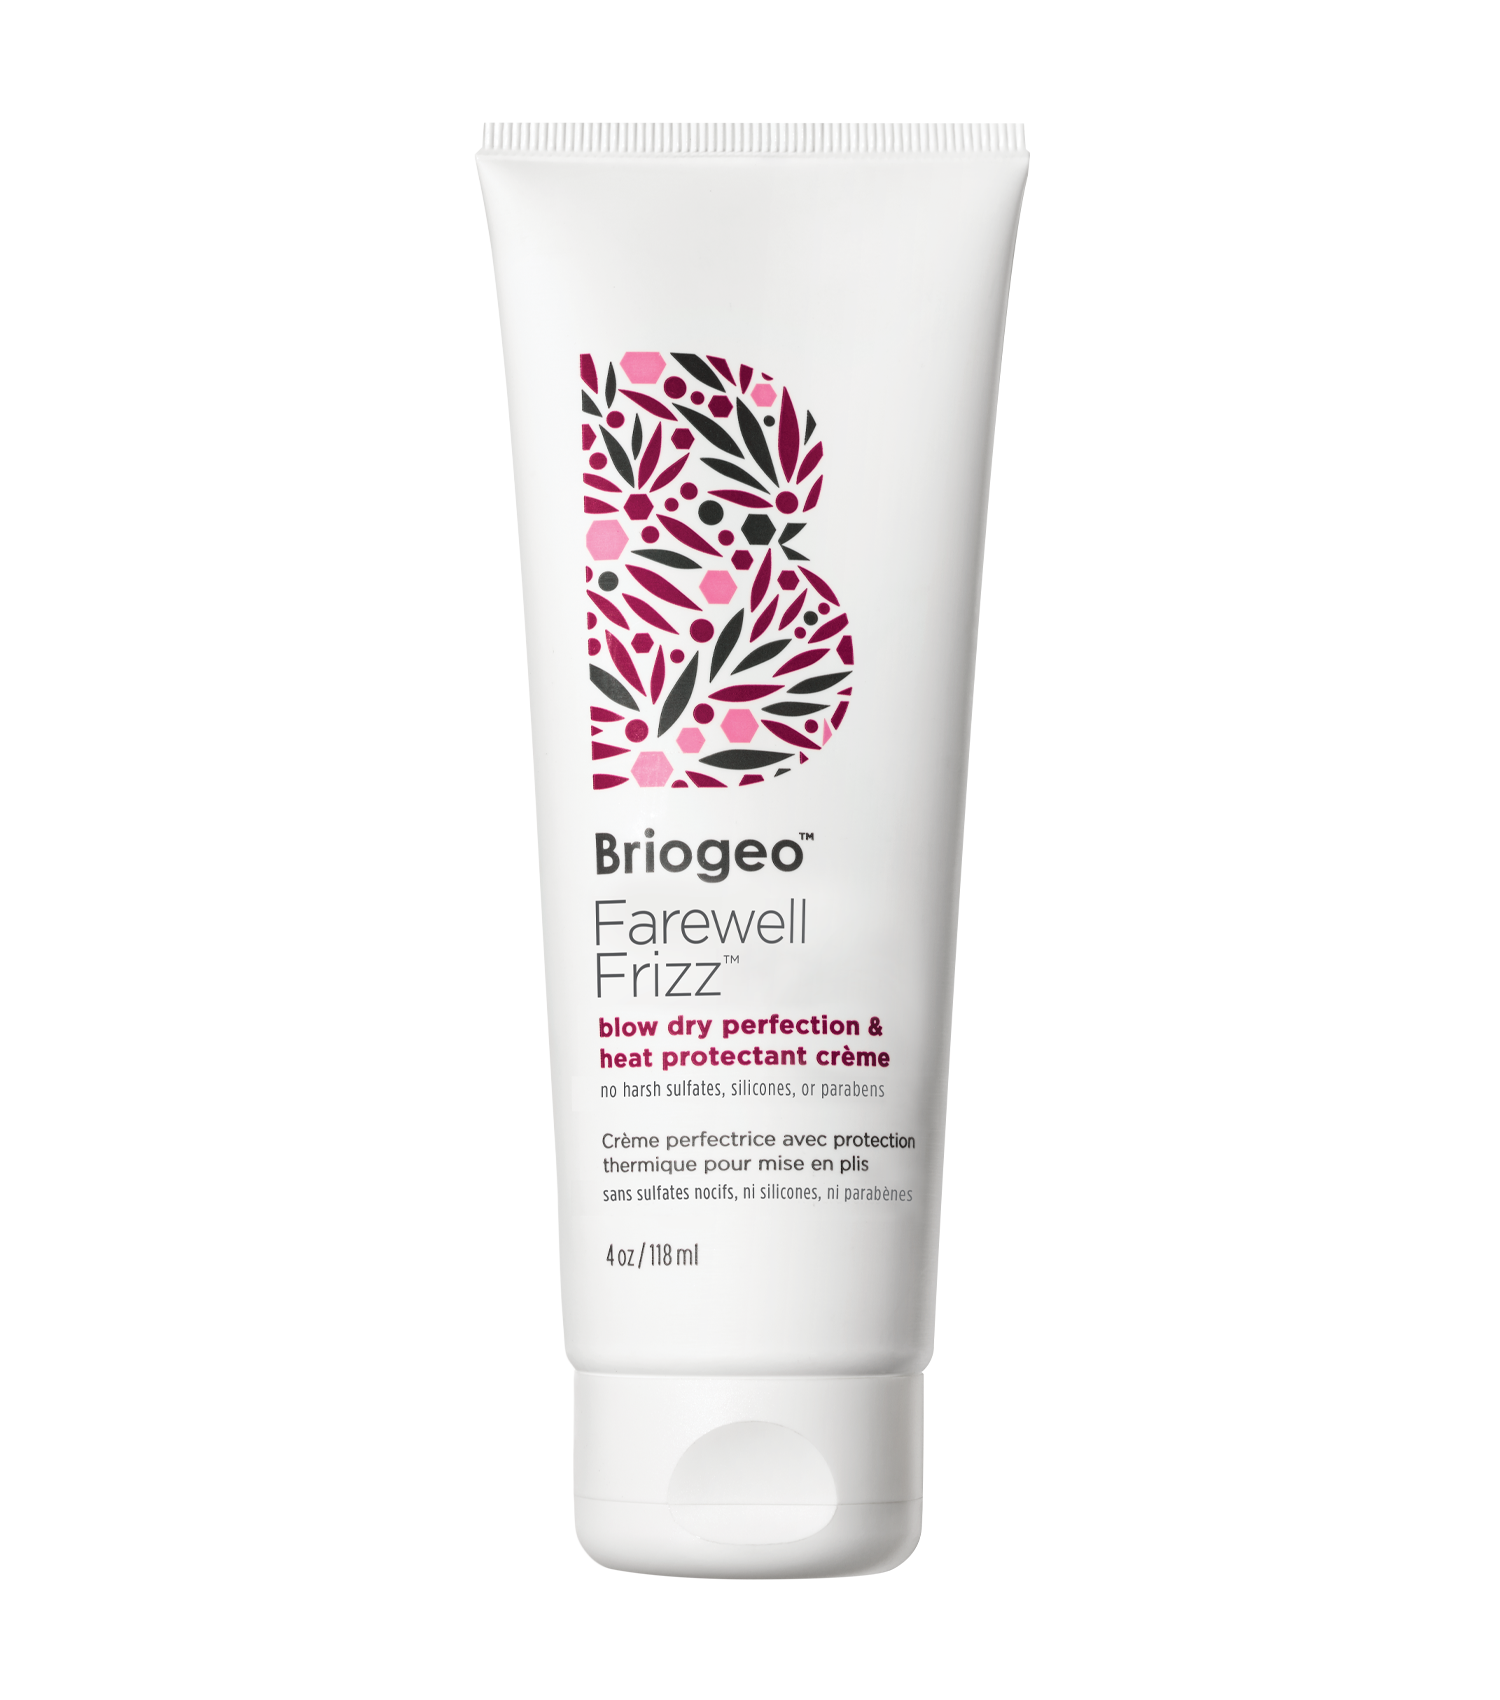 Briogeo Farewell Frizz Blow Dry Perfection & Heat Protectant Crème (repack 2019)